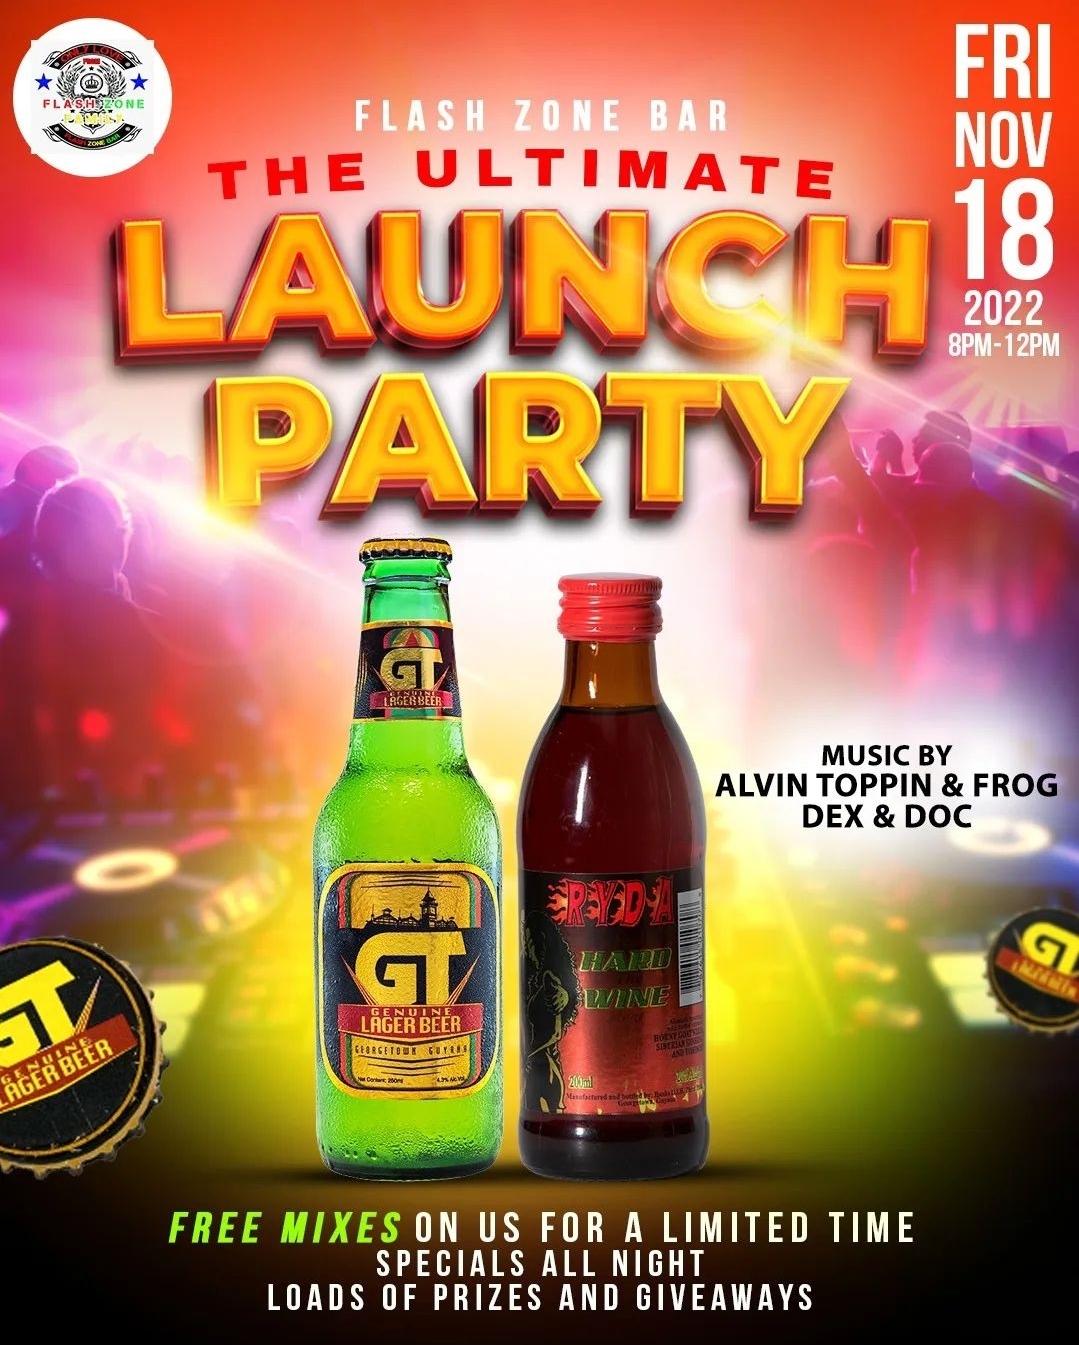 The Ultimate Launch Party